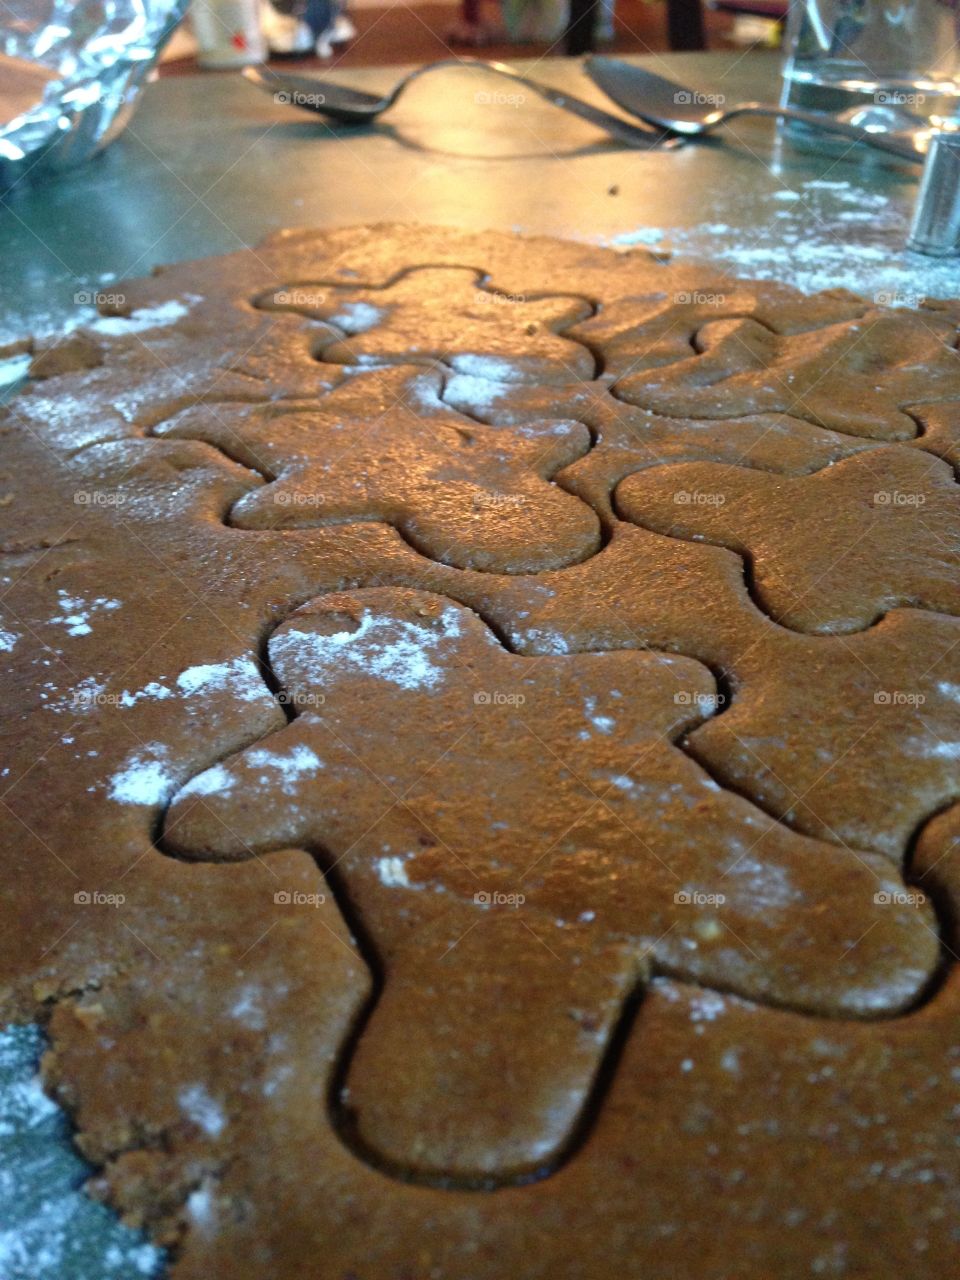 Baking some gluten free ginger bread cookies 